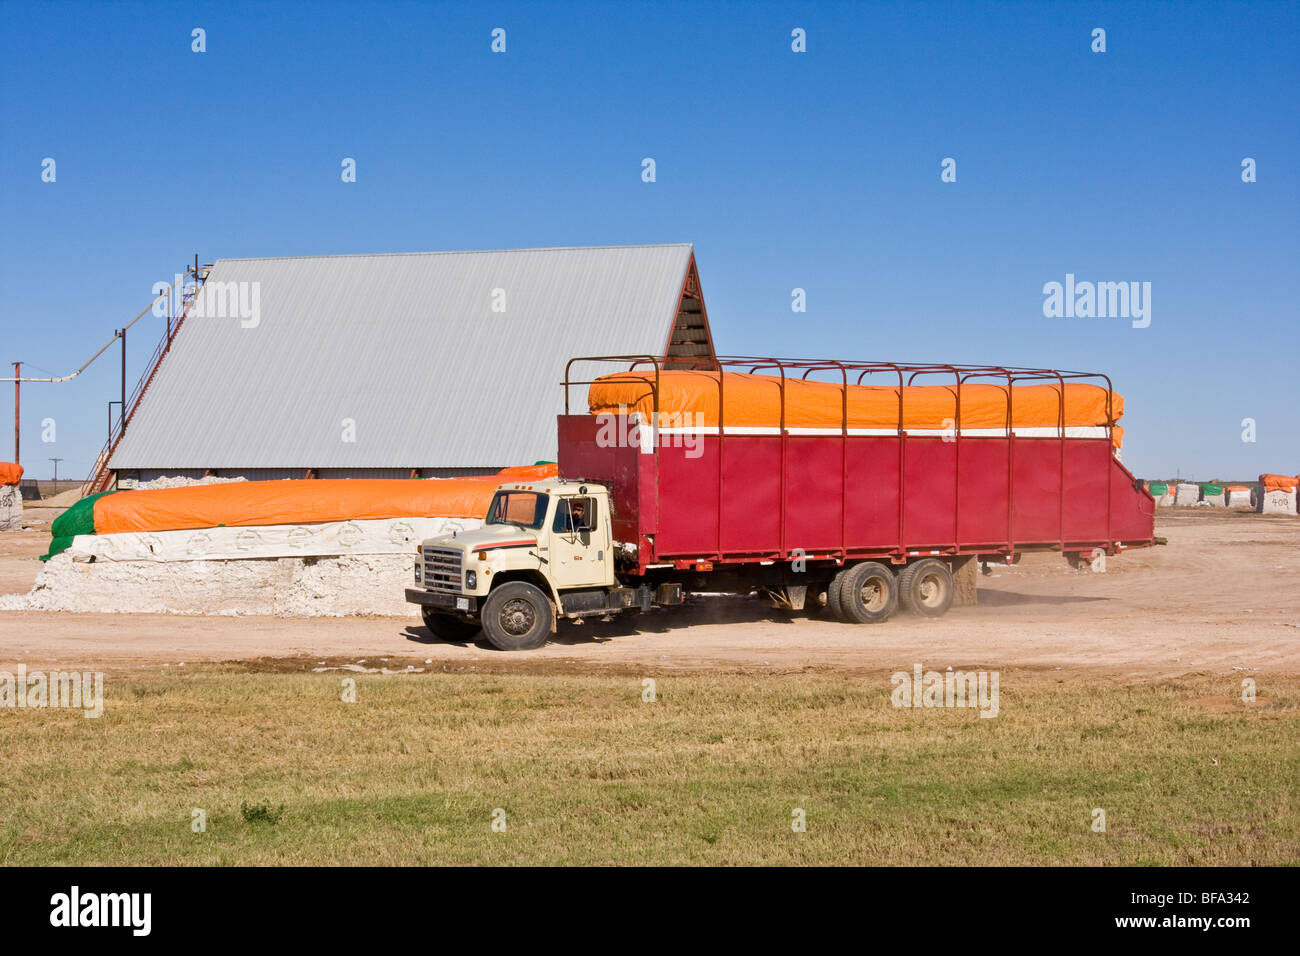 Cotton module with red colored tarp is moved with a module truck to the processing area at a cotton gin in Lamesa, Texas,U.S.A. Stock Photo